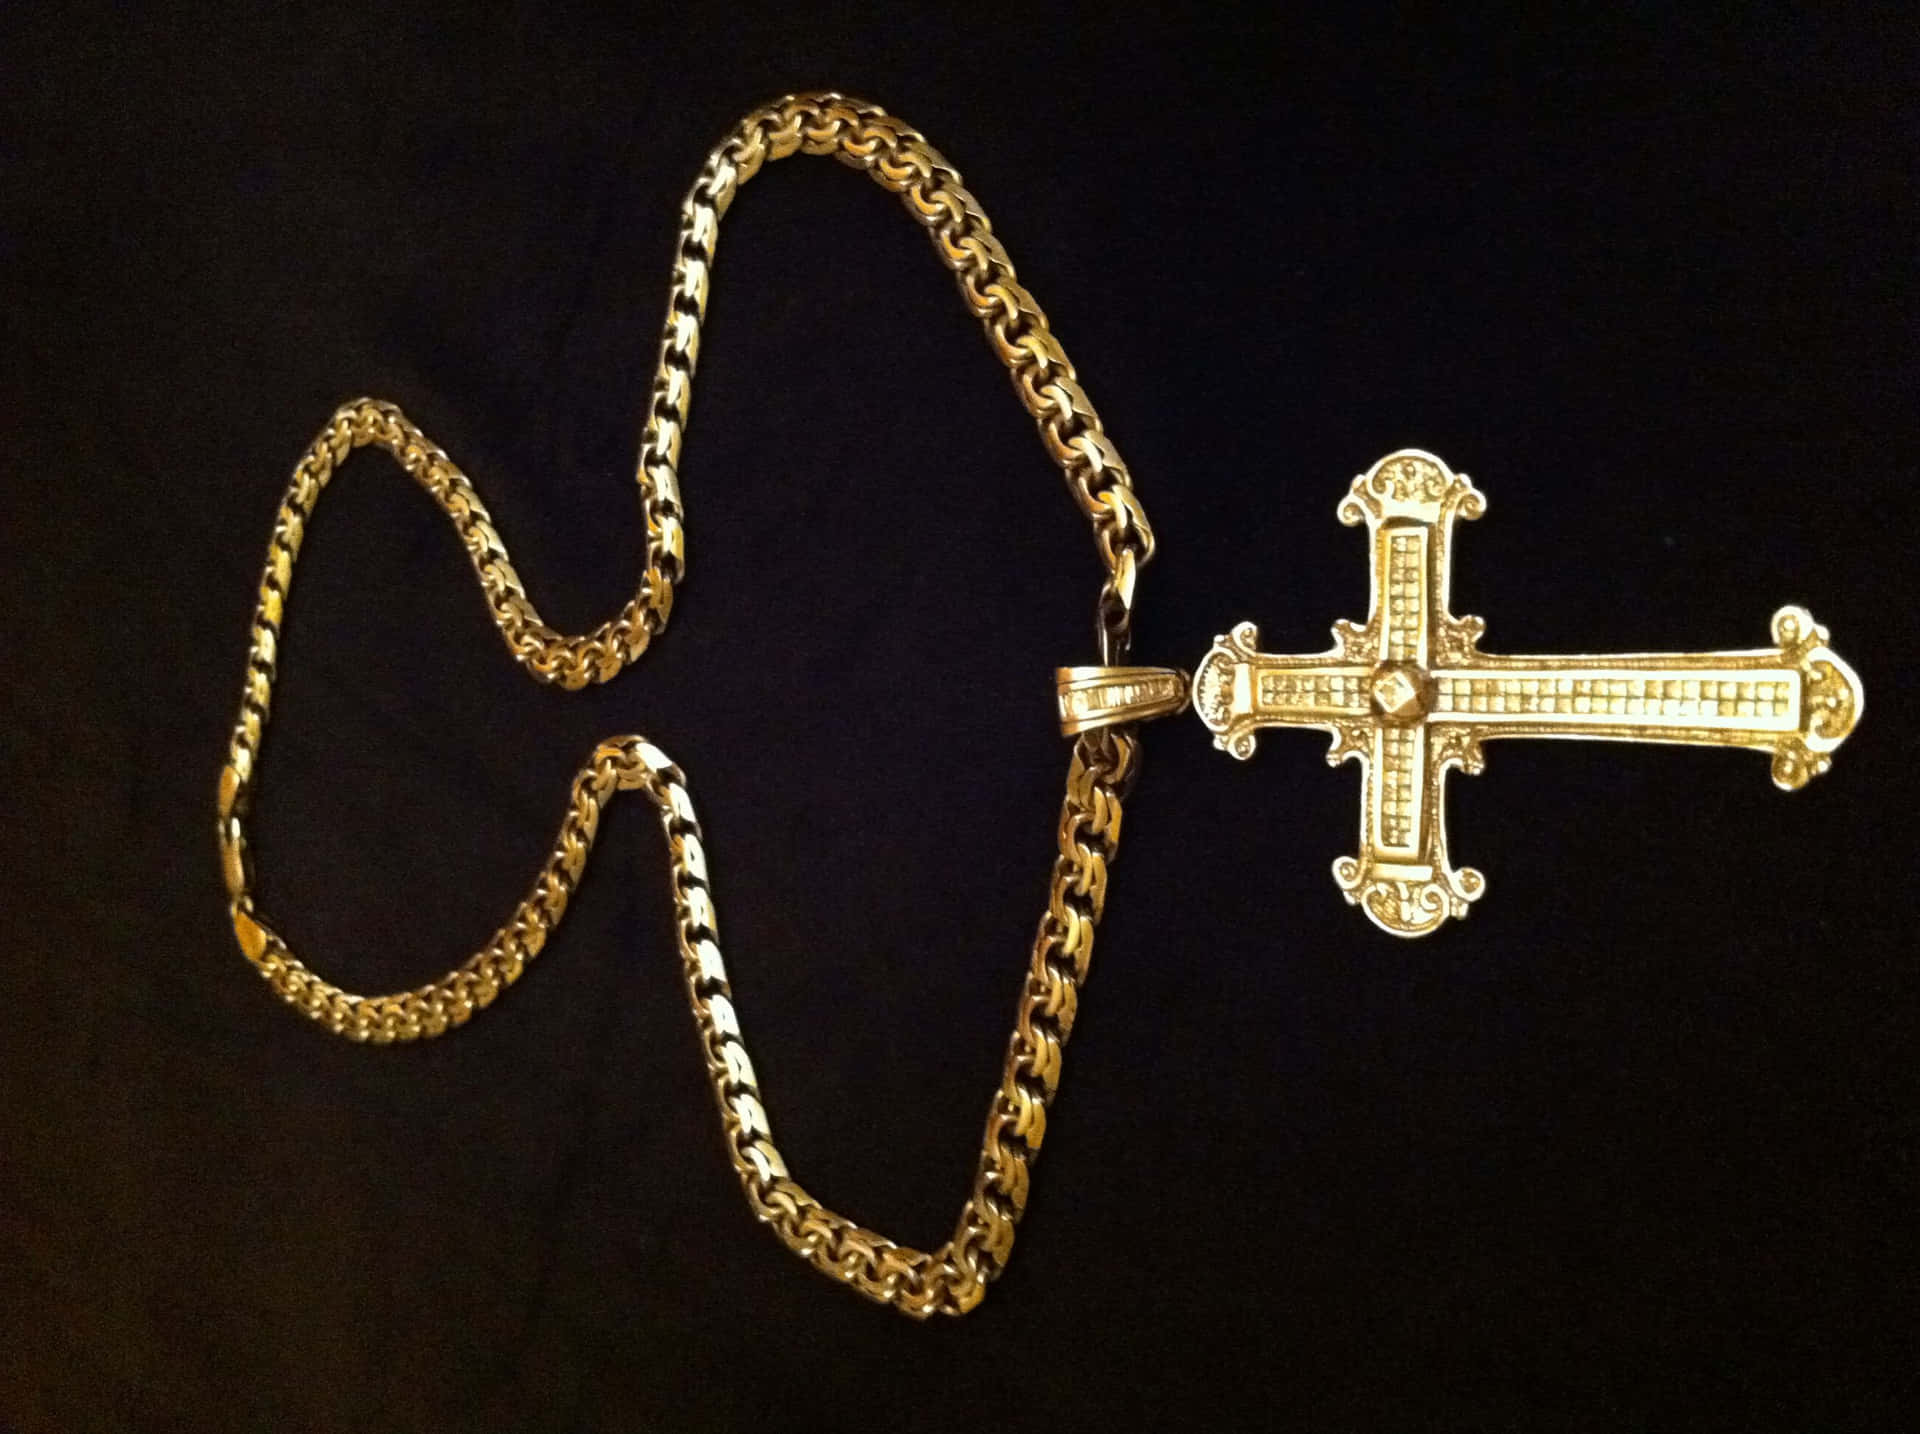 A Gold Chain With A Cross On It Wallpaper